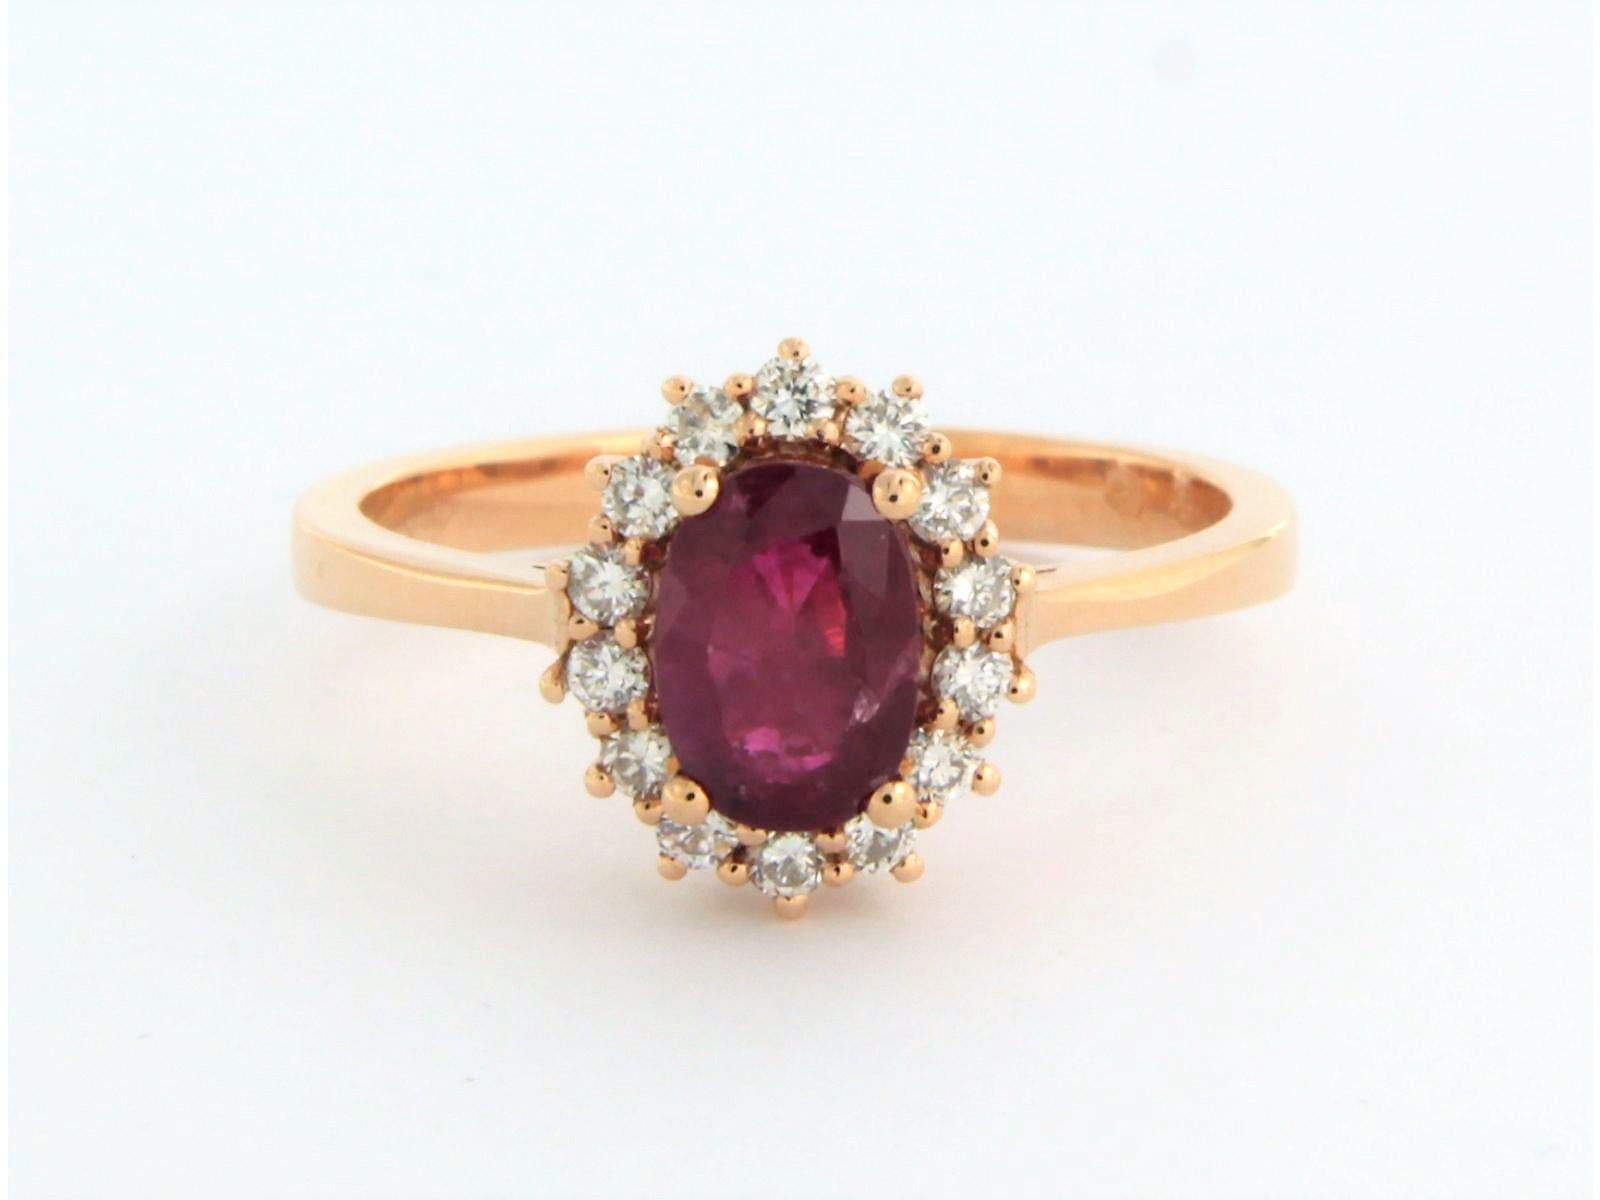 18k rose gold entourage ring set with a central ruby. 1.05ct and an entourage of brilliant cut diamonds up to. 0.26ct - F/G - VS/SI - ring size U.S. 7.25 - EU. 17.5 (55)

detailed description:

The top of the ring is in an oval shape measuring 1.1